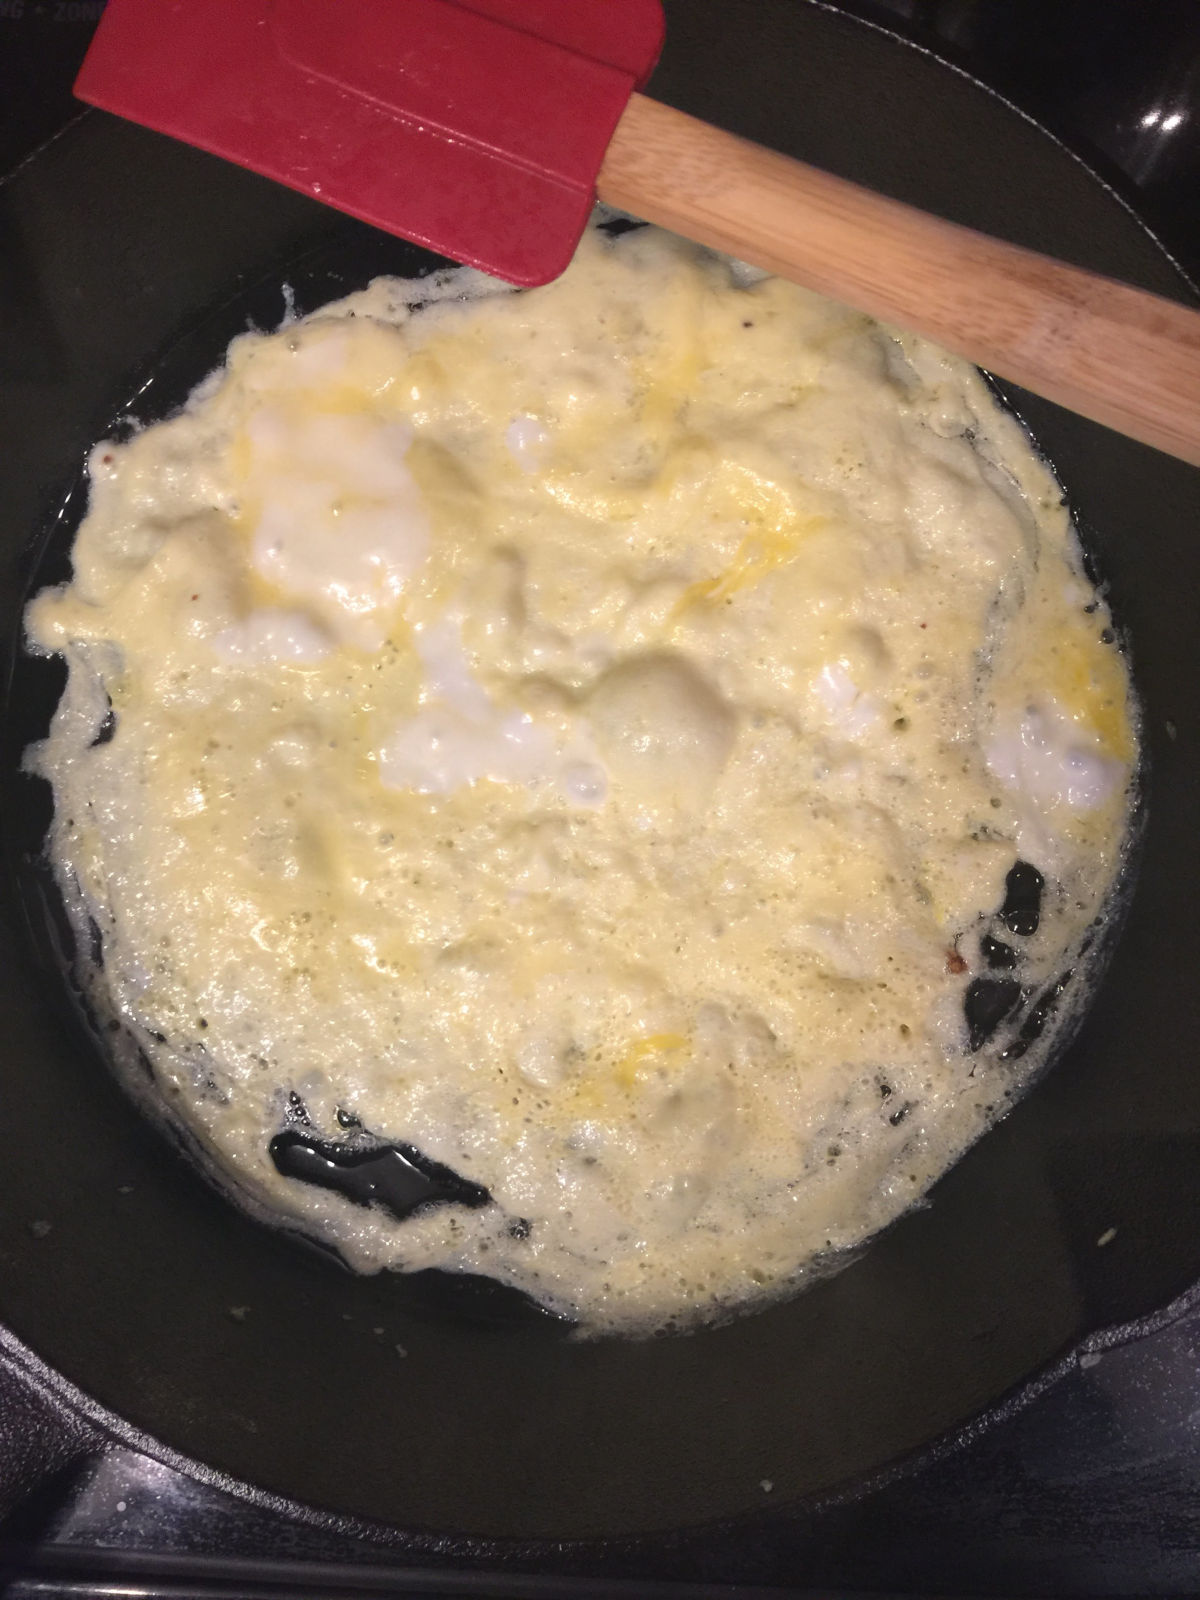 Overhead view of egg cooking in iron skillet.